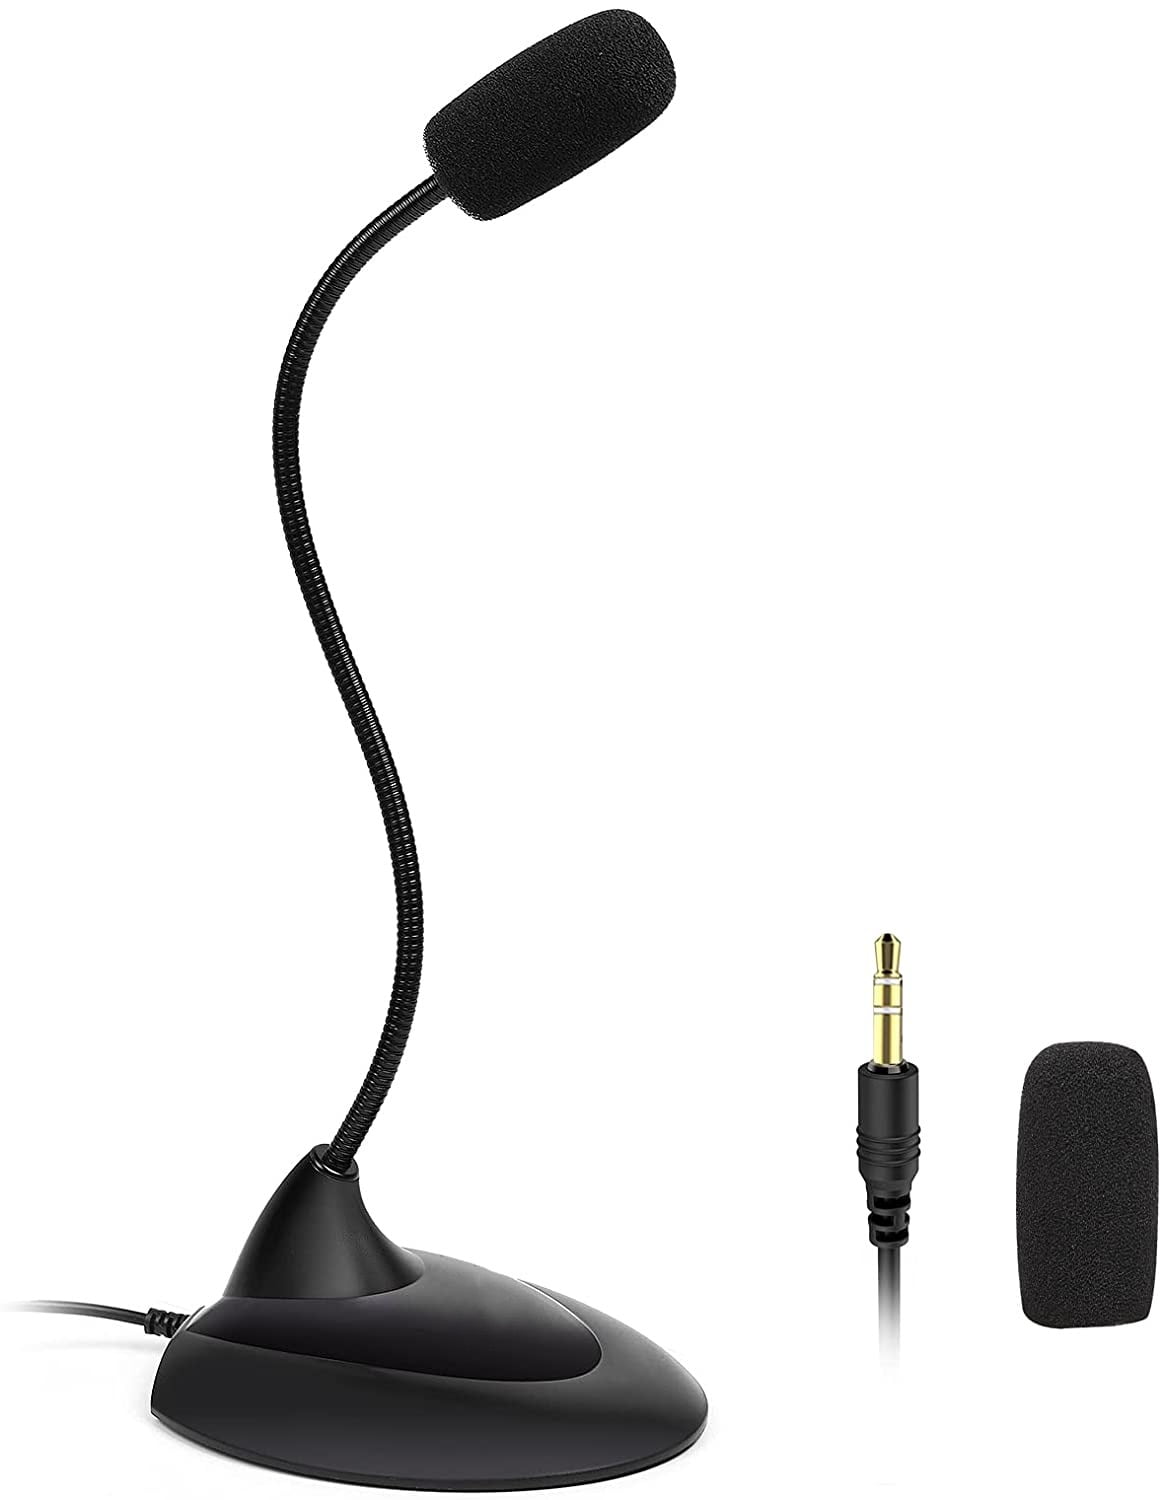 Skype 6" Travel Mini Flexible Hold 3.5mm Stereo Microphone for Laptop/Notebook 